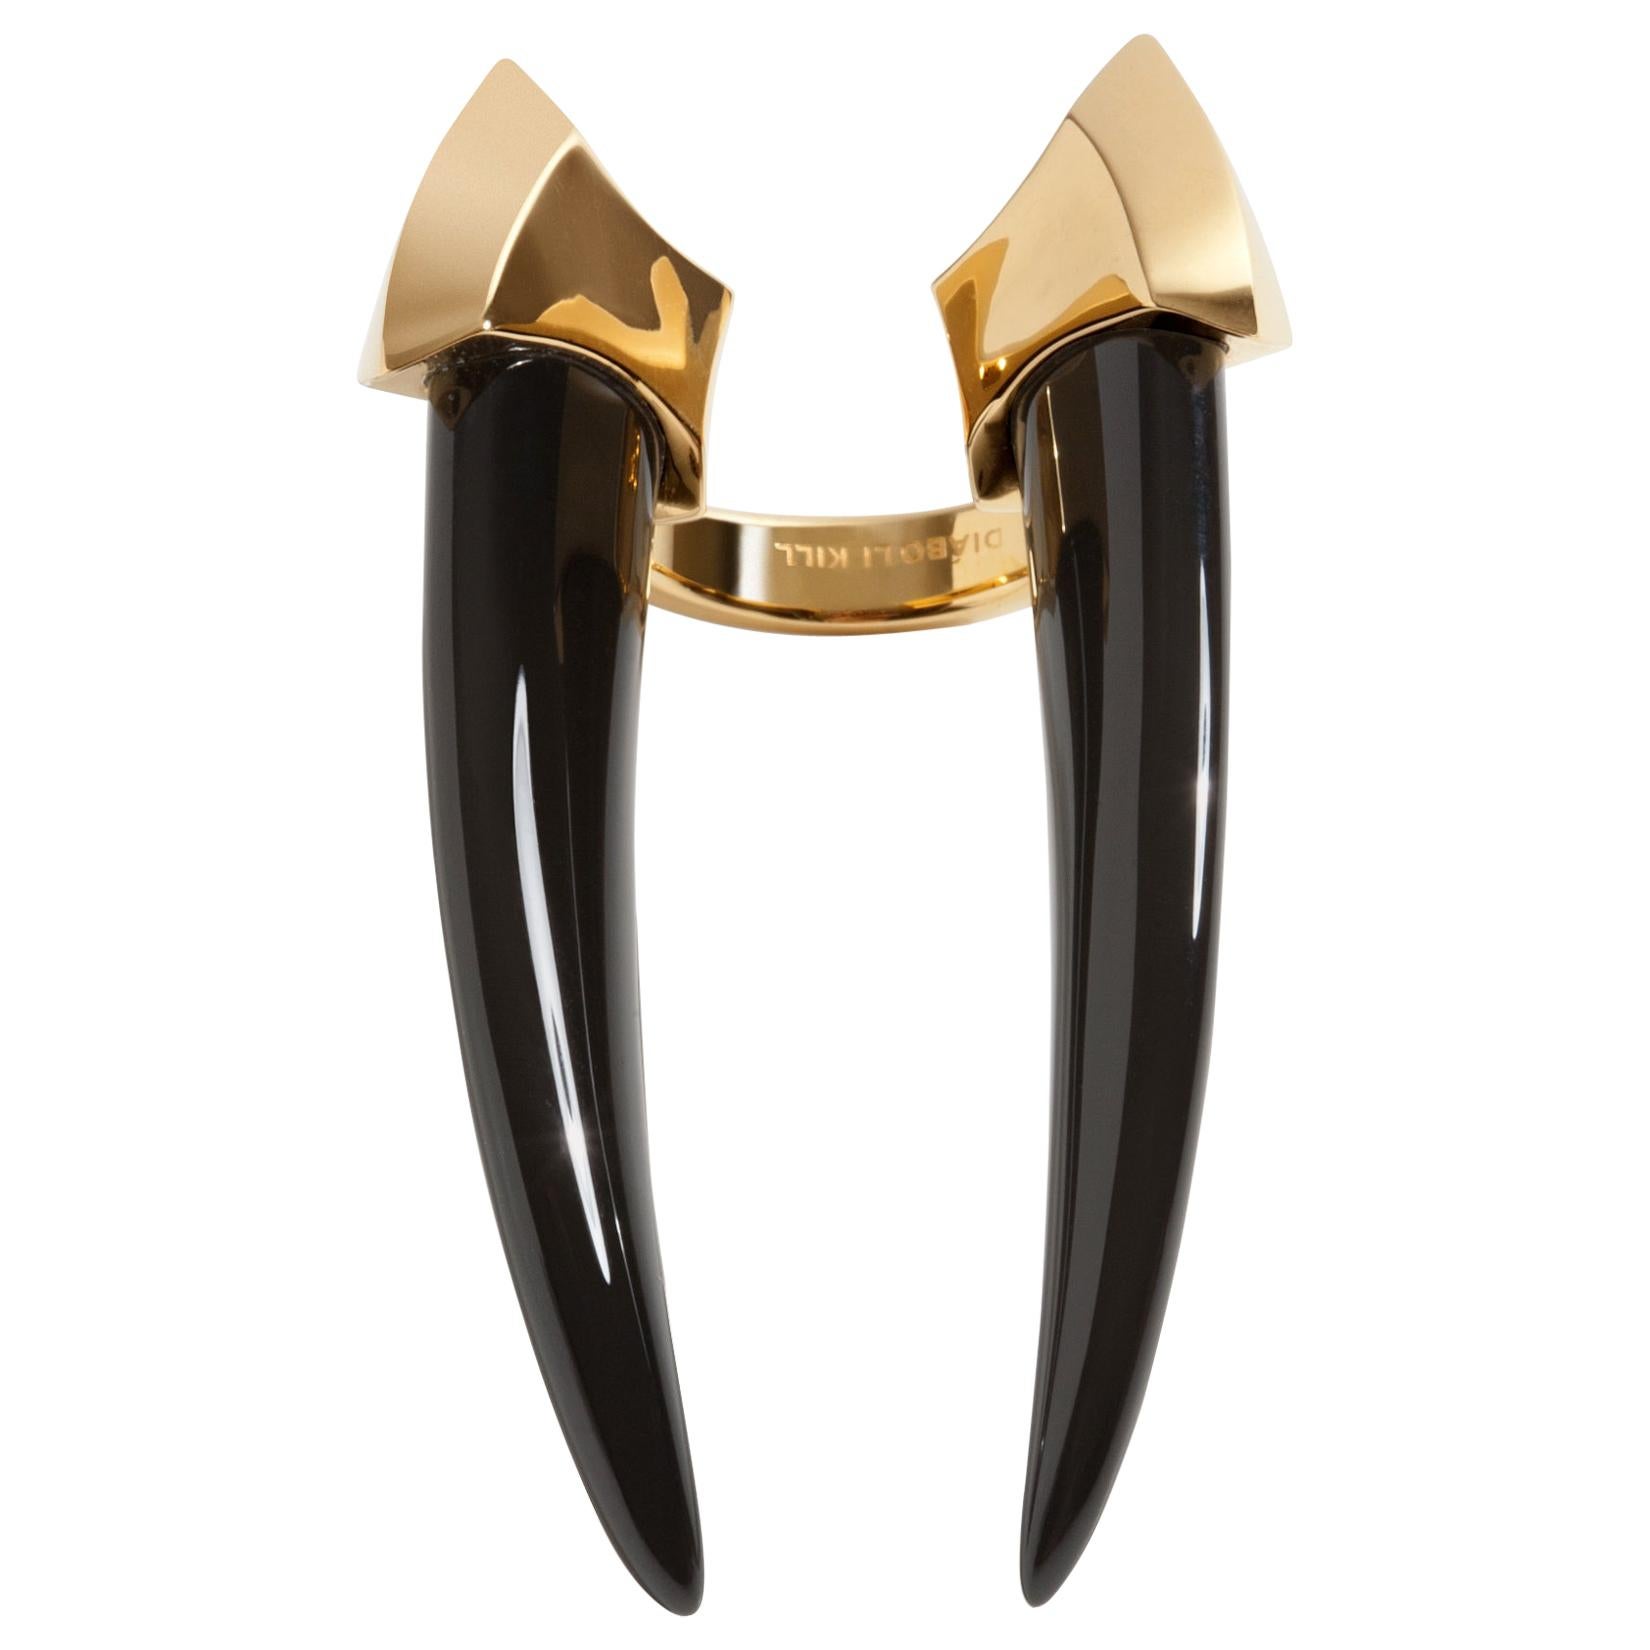 Angie Marei Damian Brevis Black Onyx Horn Ring in 18 Karat Yellow Gold For Sale